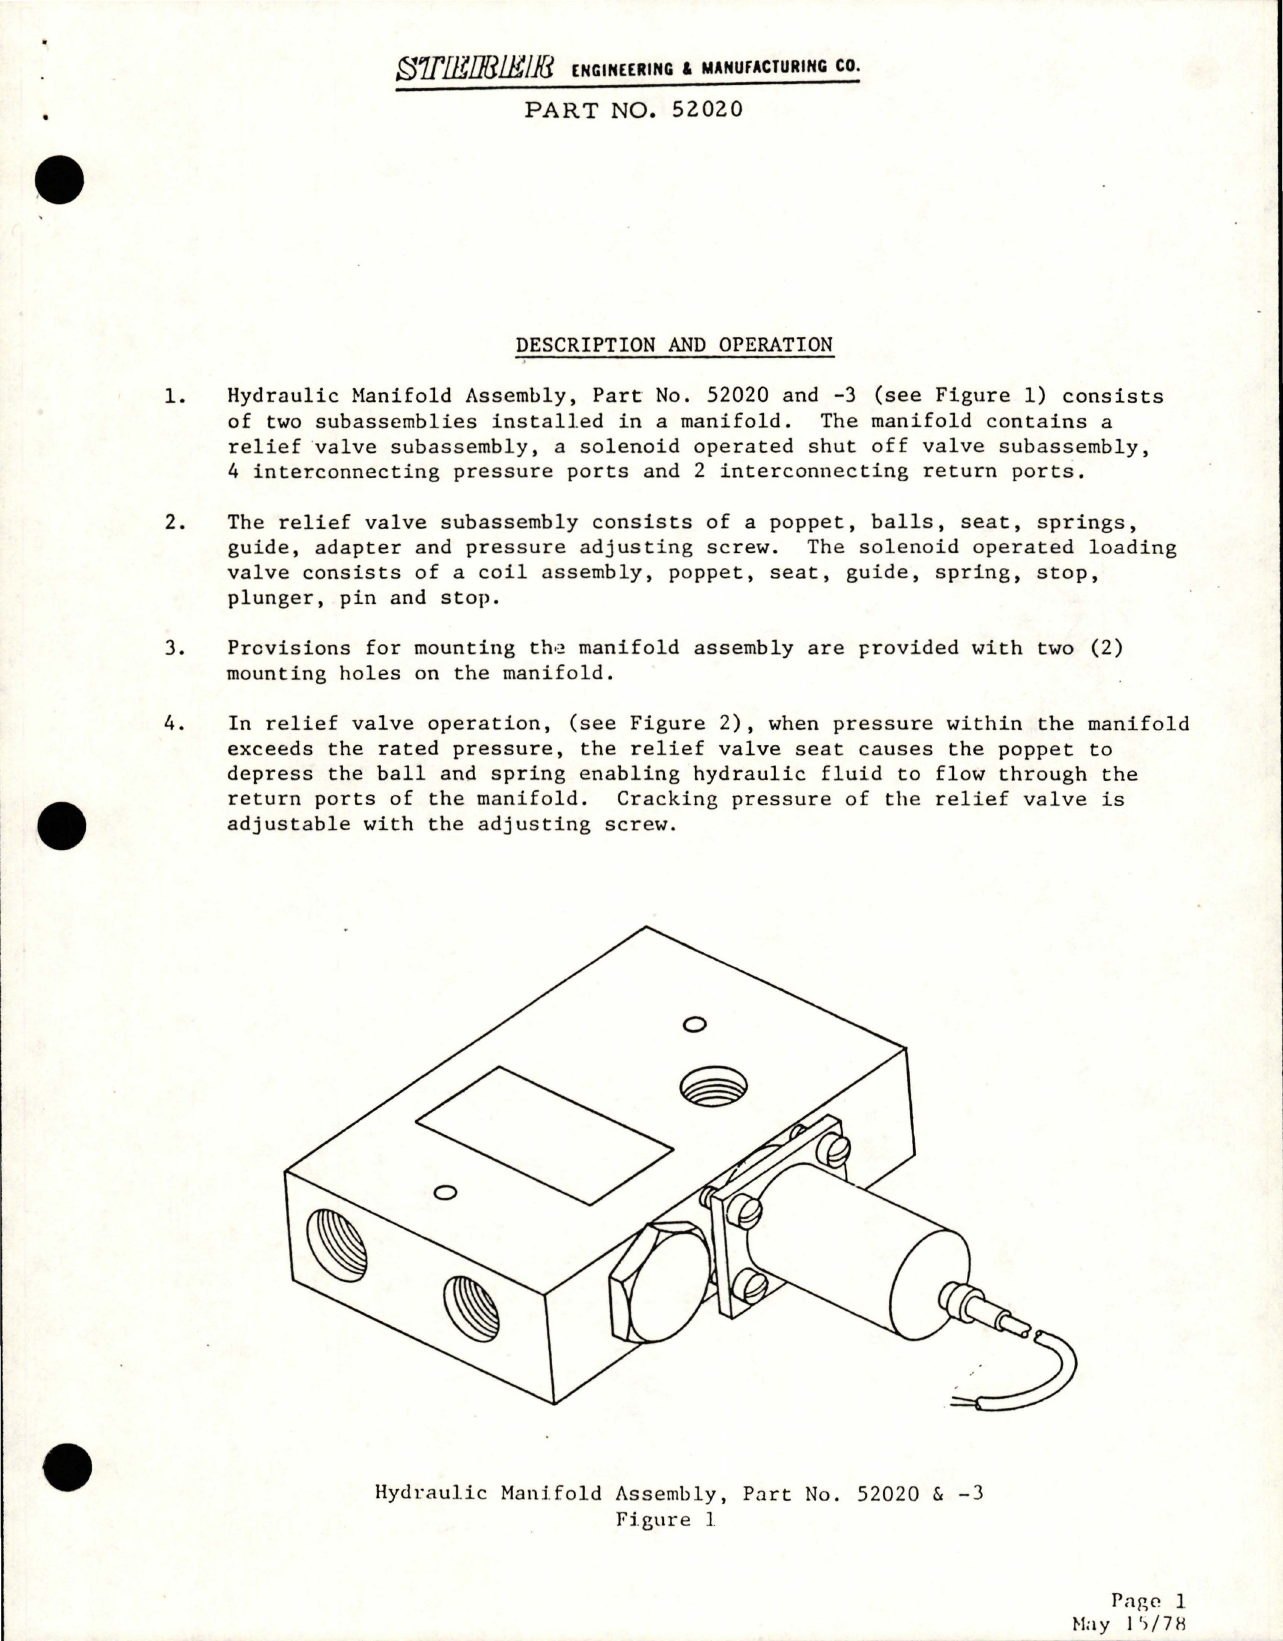 Sample page 7 from AirCorps Library document: Overhaul Manual with Illustrated Parts List for Hydraulic Manifold Assembly - Part 52020, 52020-3